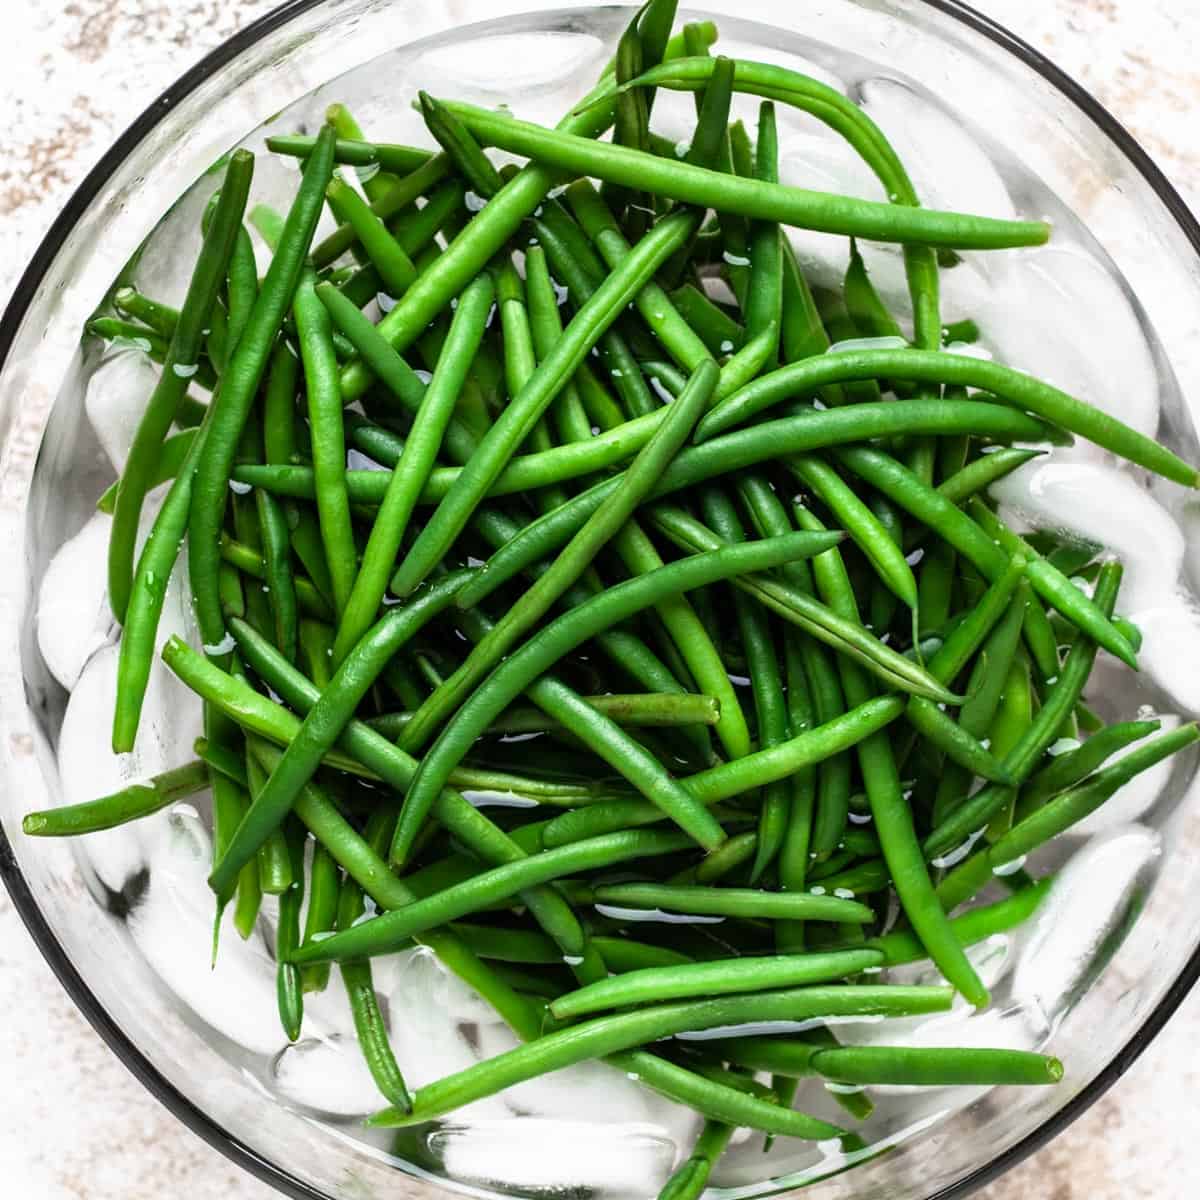 Green beans in a bowl of ice water.